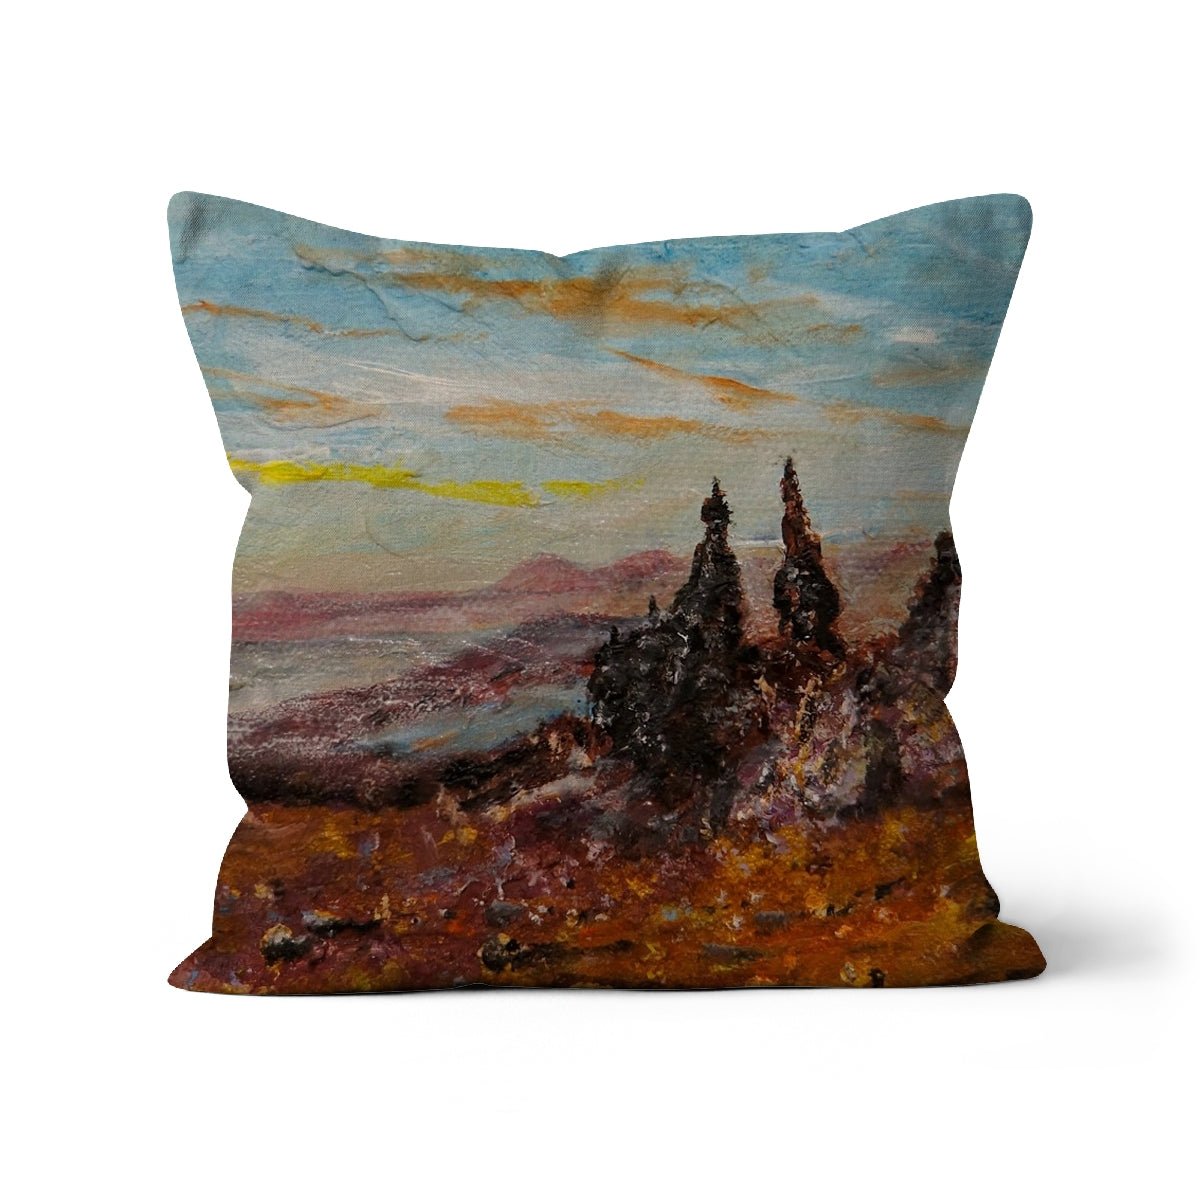 The Old Man Of Storr Skye Art Gifts Cushion-Cushions-Skye Art Gallery-Canvas-22"x22"-Paintings, Prints, Homeware, Art Gifts From Scotland By Scottish Artist Kevin Hunter